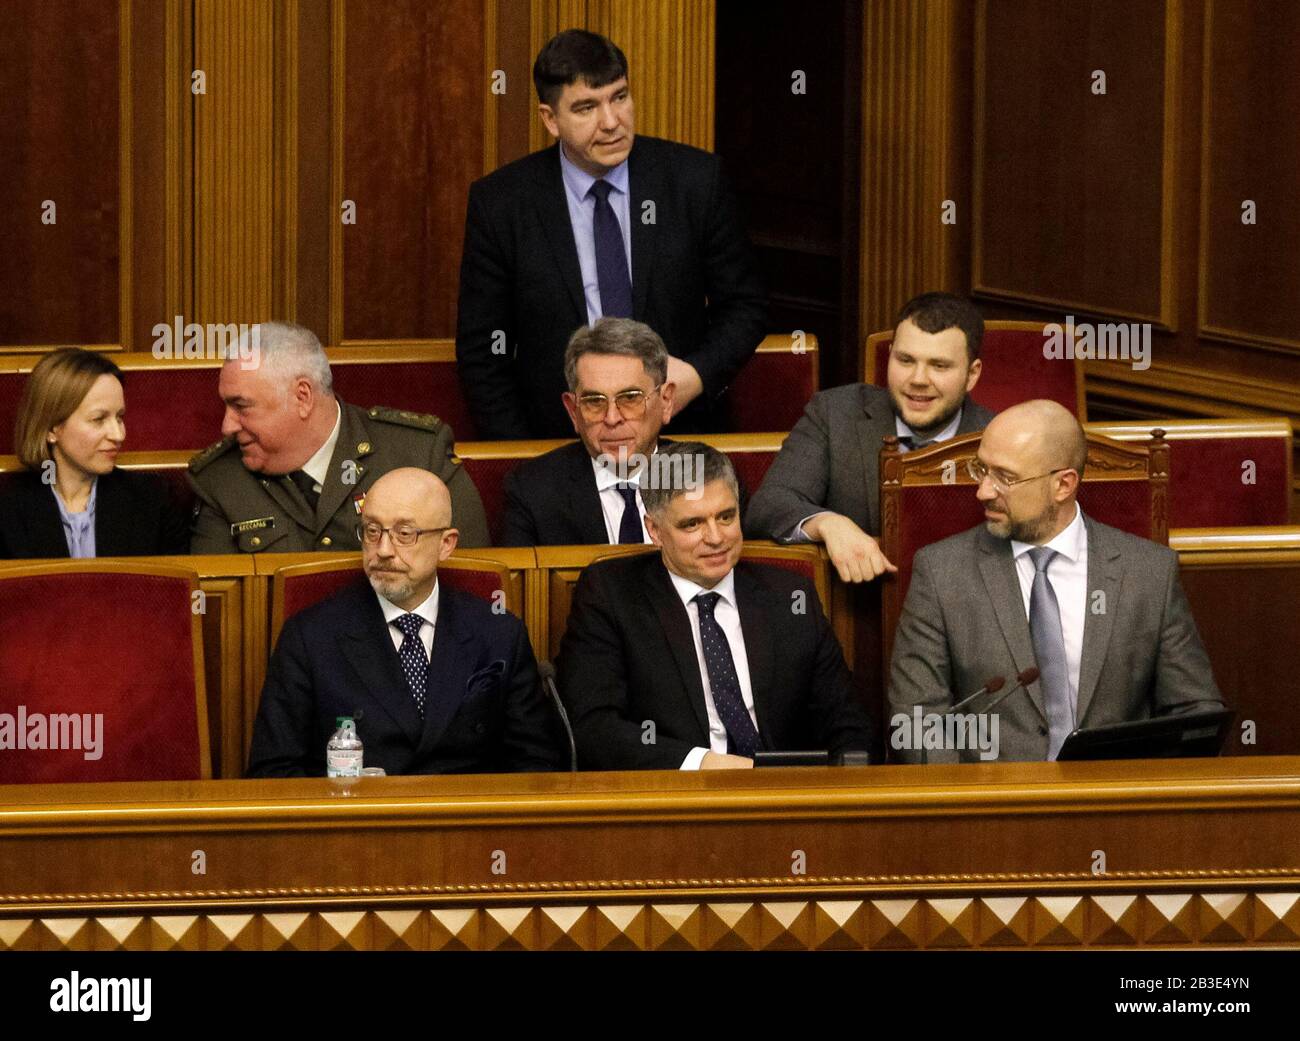 Kiev, Ukraine. 4th Mar, 2020. Newly-appointed Ukrainian Prime Minister DENYS SHMYGAL (R) and members of the newly appointed Cabinet of Ministers react during a parliamentary session in Kiev, Ukraine, on 4 March 2020. Ukrainian Parliament supported proposal of the Ukrainian President and voted to appoint DENIS SHMYGAL as new Ukraine's Prime Minister. Credit: Serg Glovny/ZUMA Wire/Alamy Live News Stock Photo